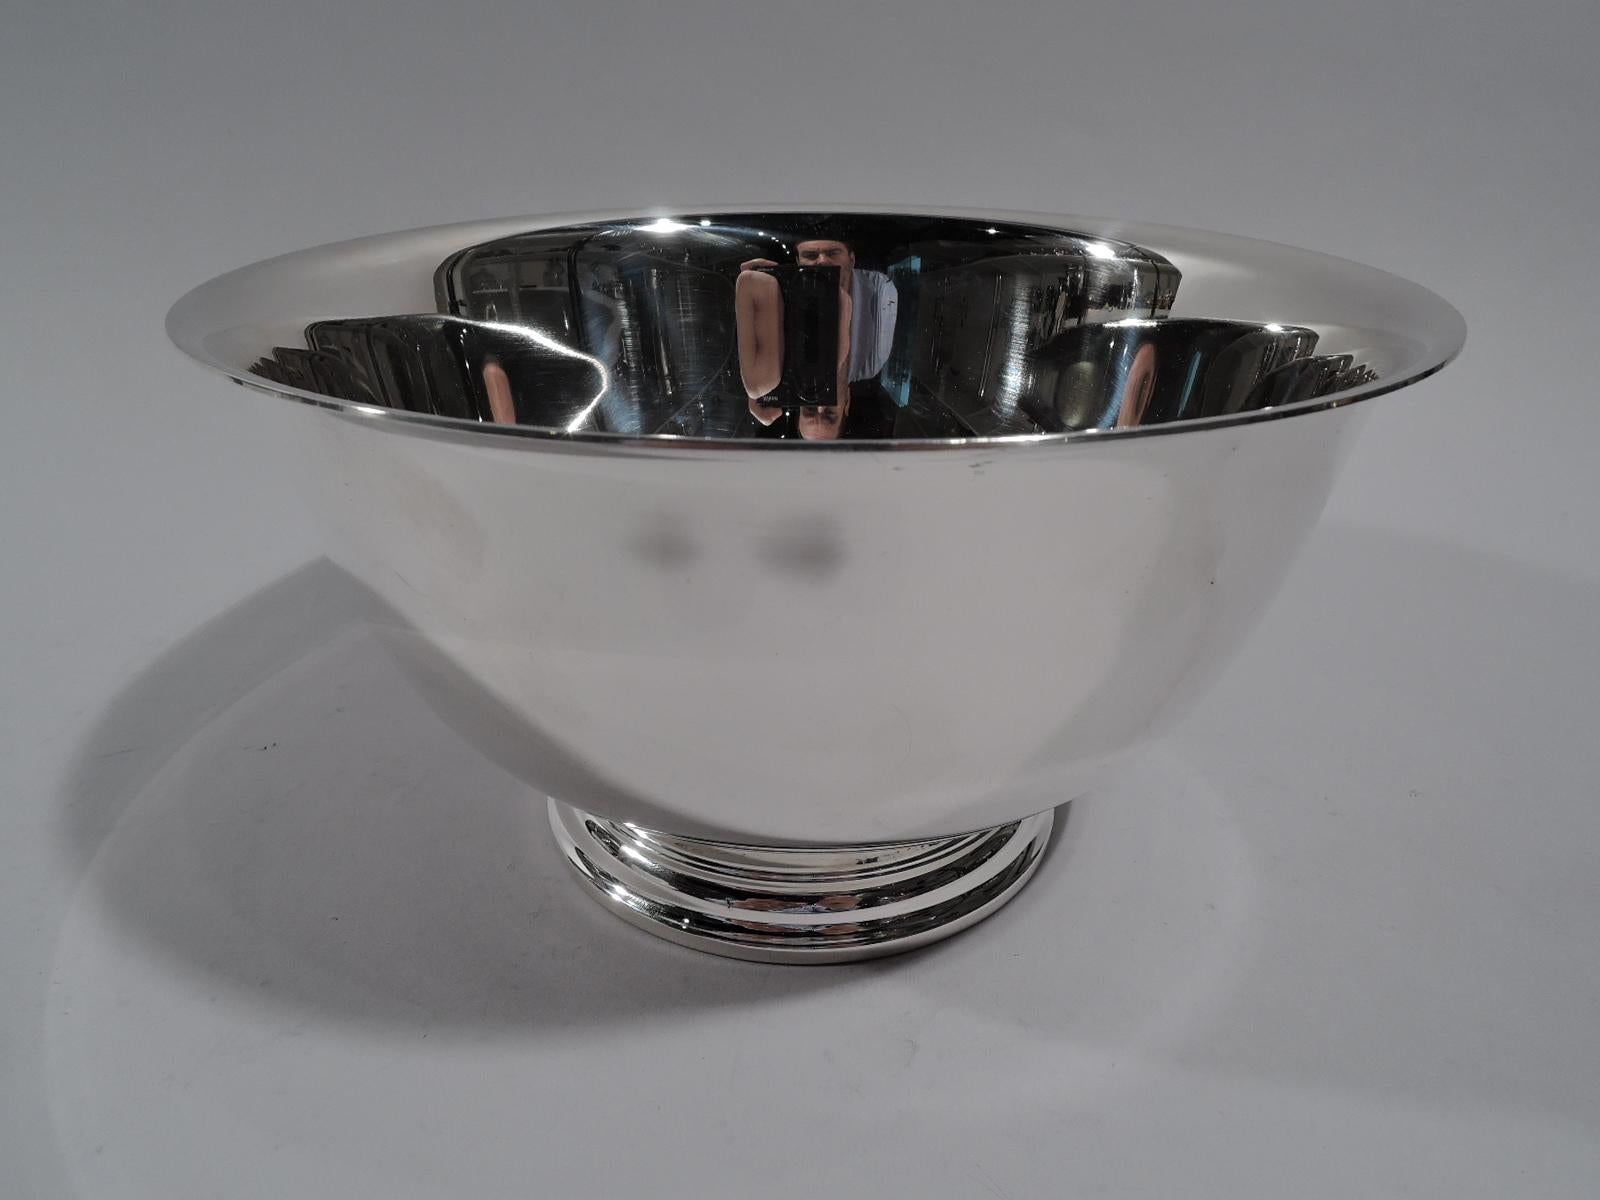 American Colonial Revival sterling silver bowl. Made by Watrous in Wallingford, Conn. Traditional form with curved sides and stepped foot. Fully marked including maker’s stamp, no. 3E, and phrase “Paul Revere / Reproduction”. Weight: 11.5 troy